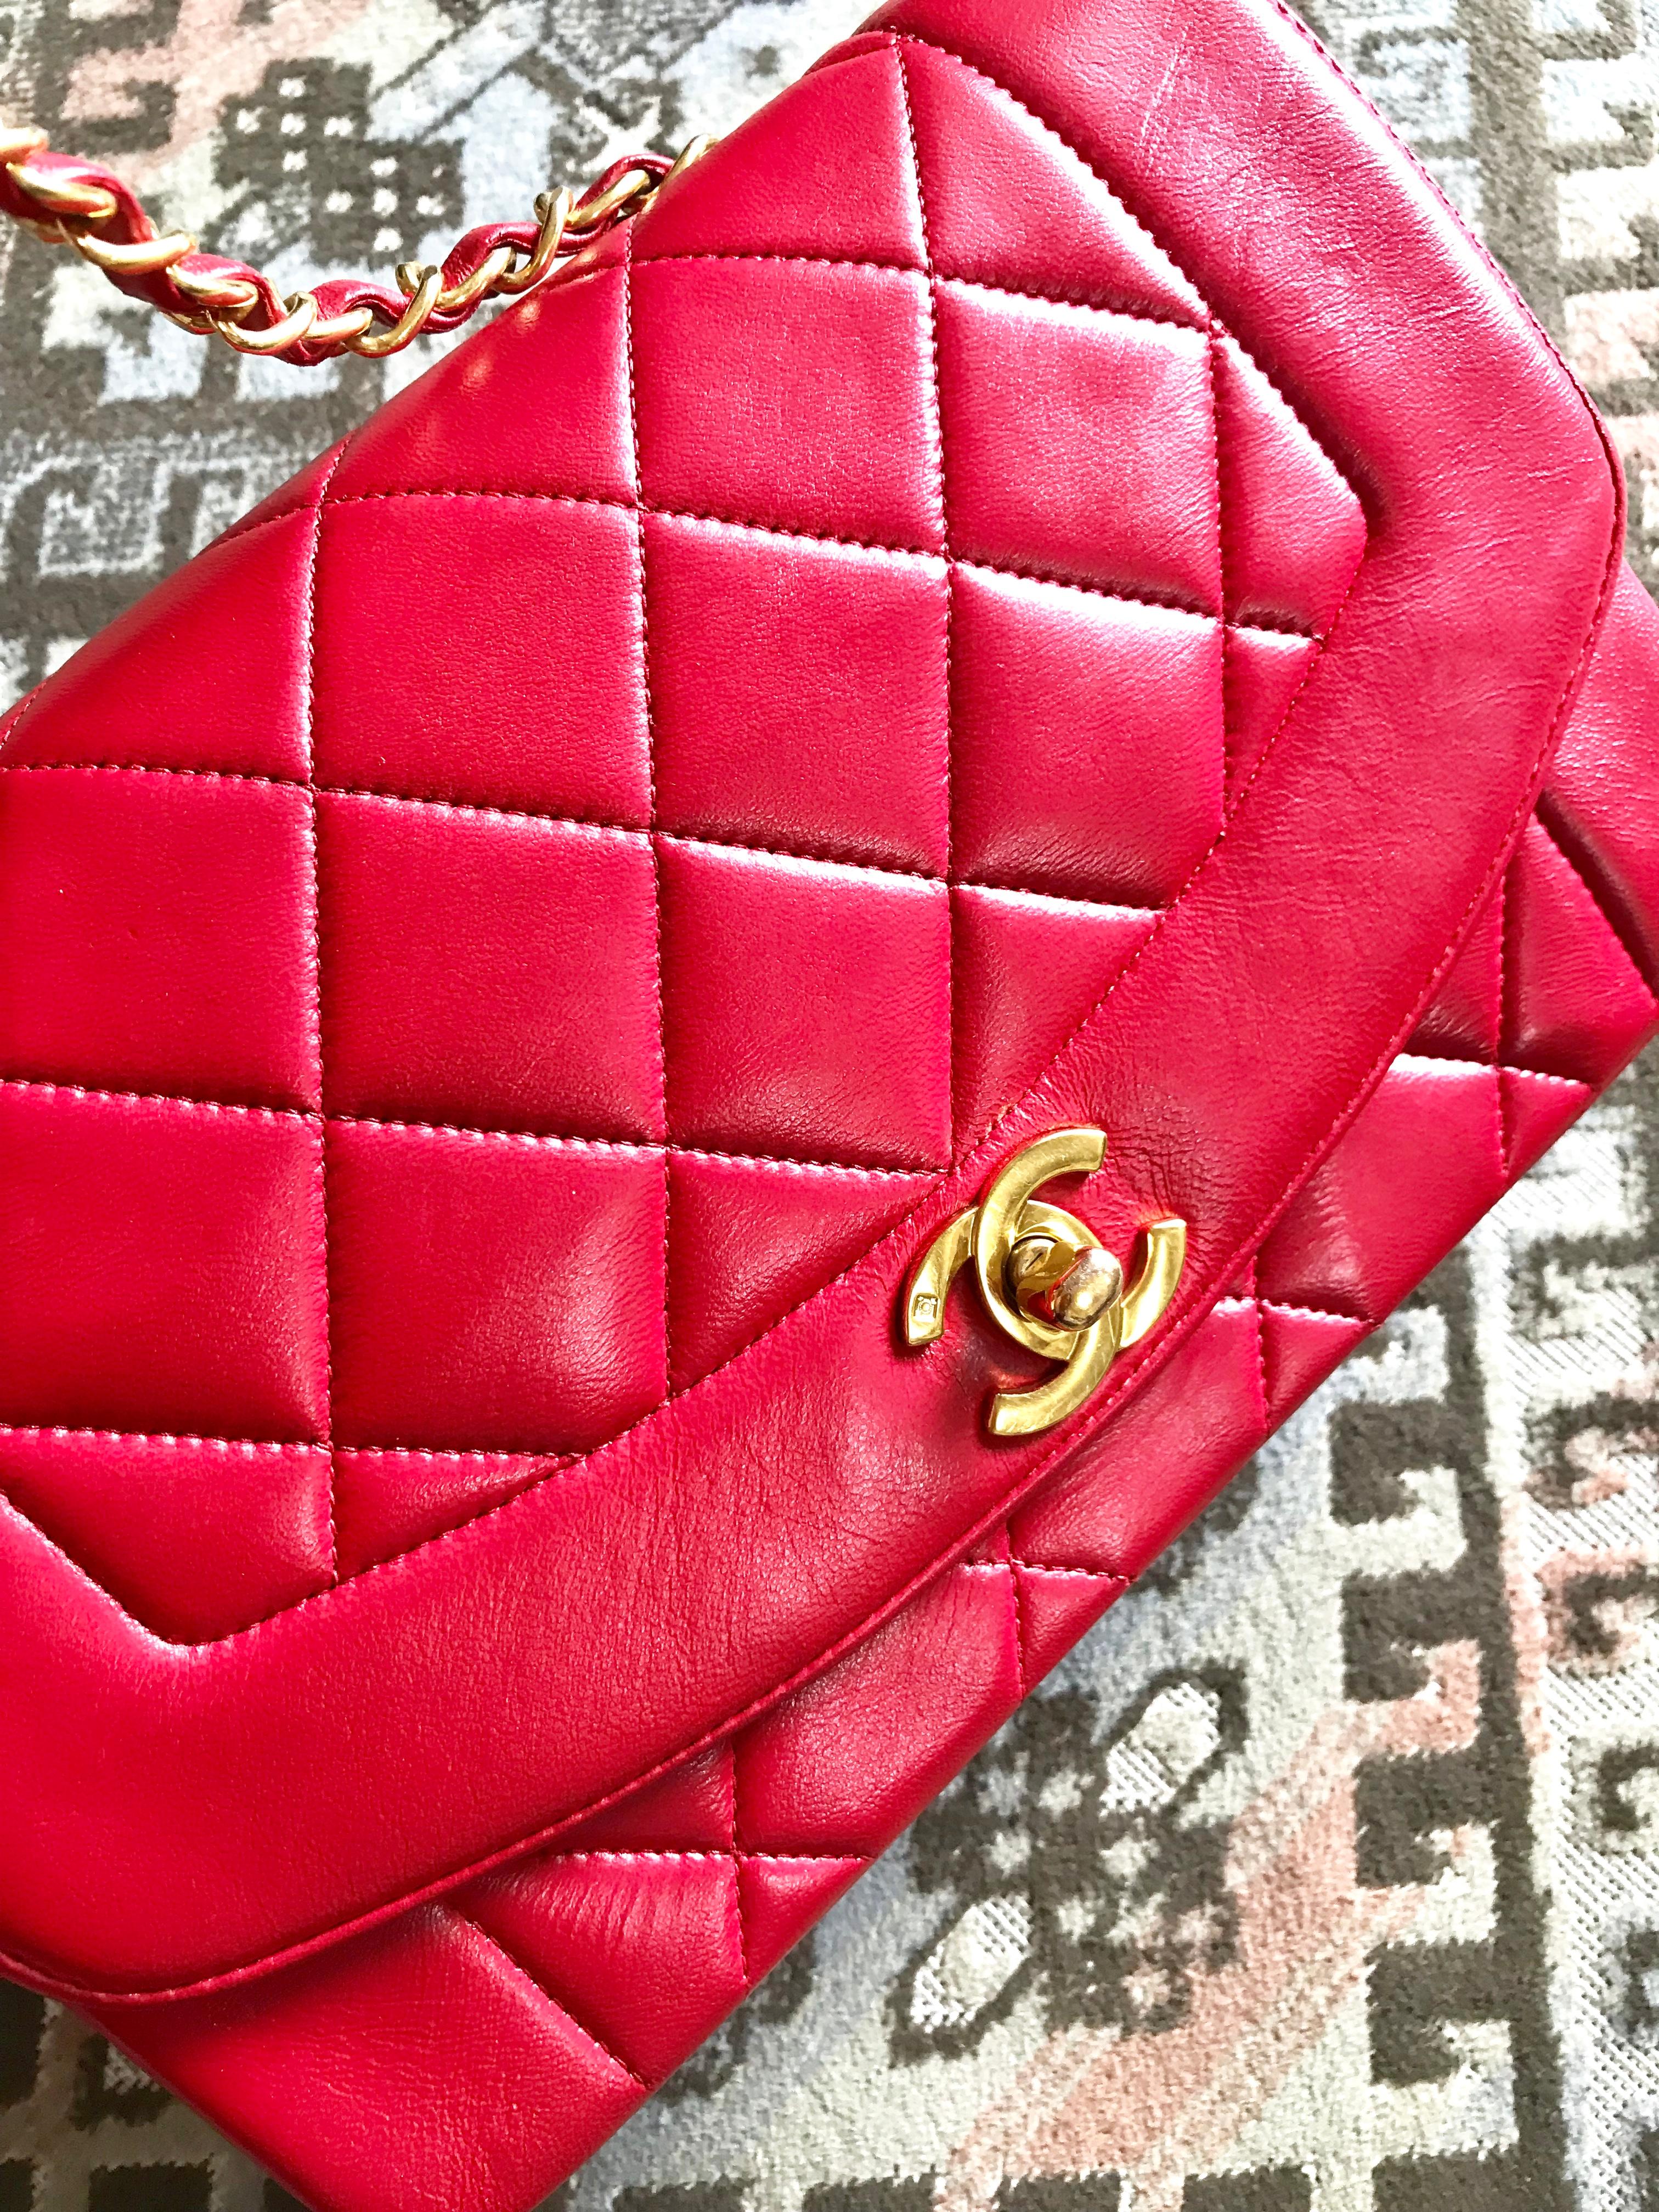 1990s. Vintage Chanel lipstick red lamb leather classic 2.55 flap chain shoulder bag, Diana purse with gold tone CC closure. 
Rare color for Diana bag, back in the 90's.

Beautiful vintage condition!

Introducing one of the most popular pieces from